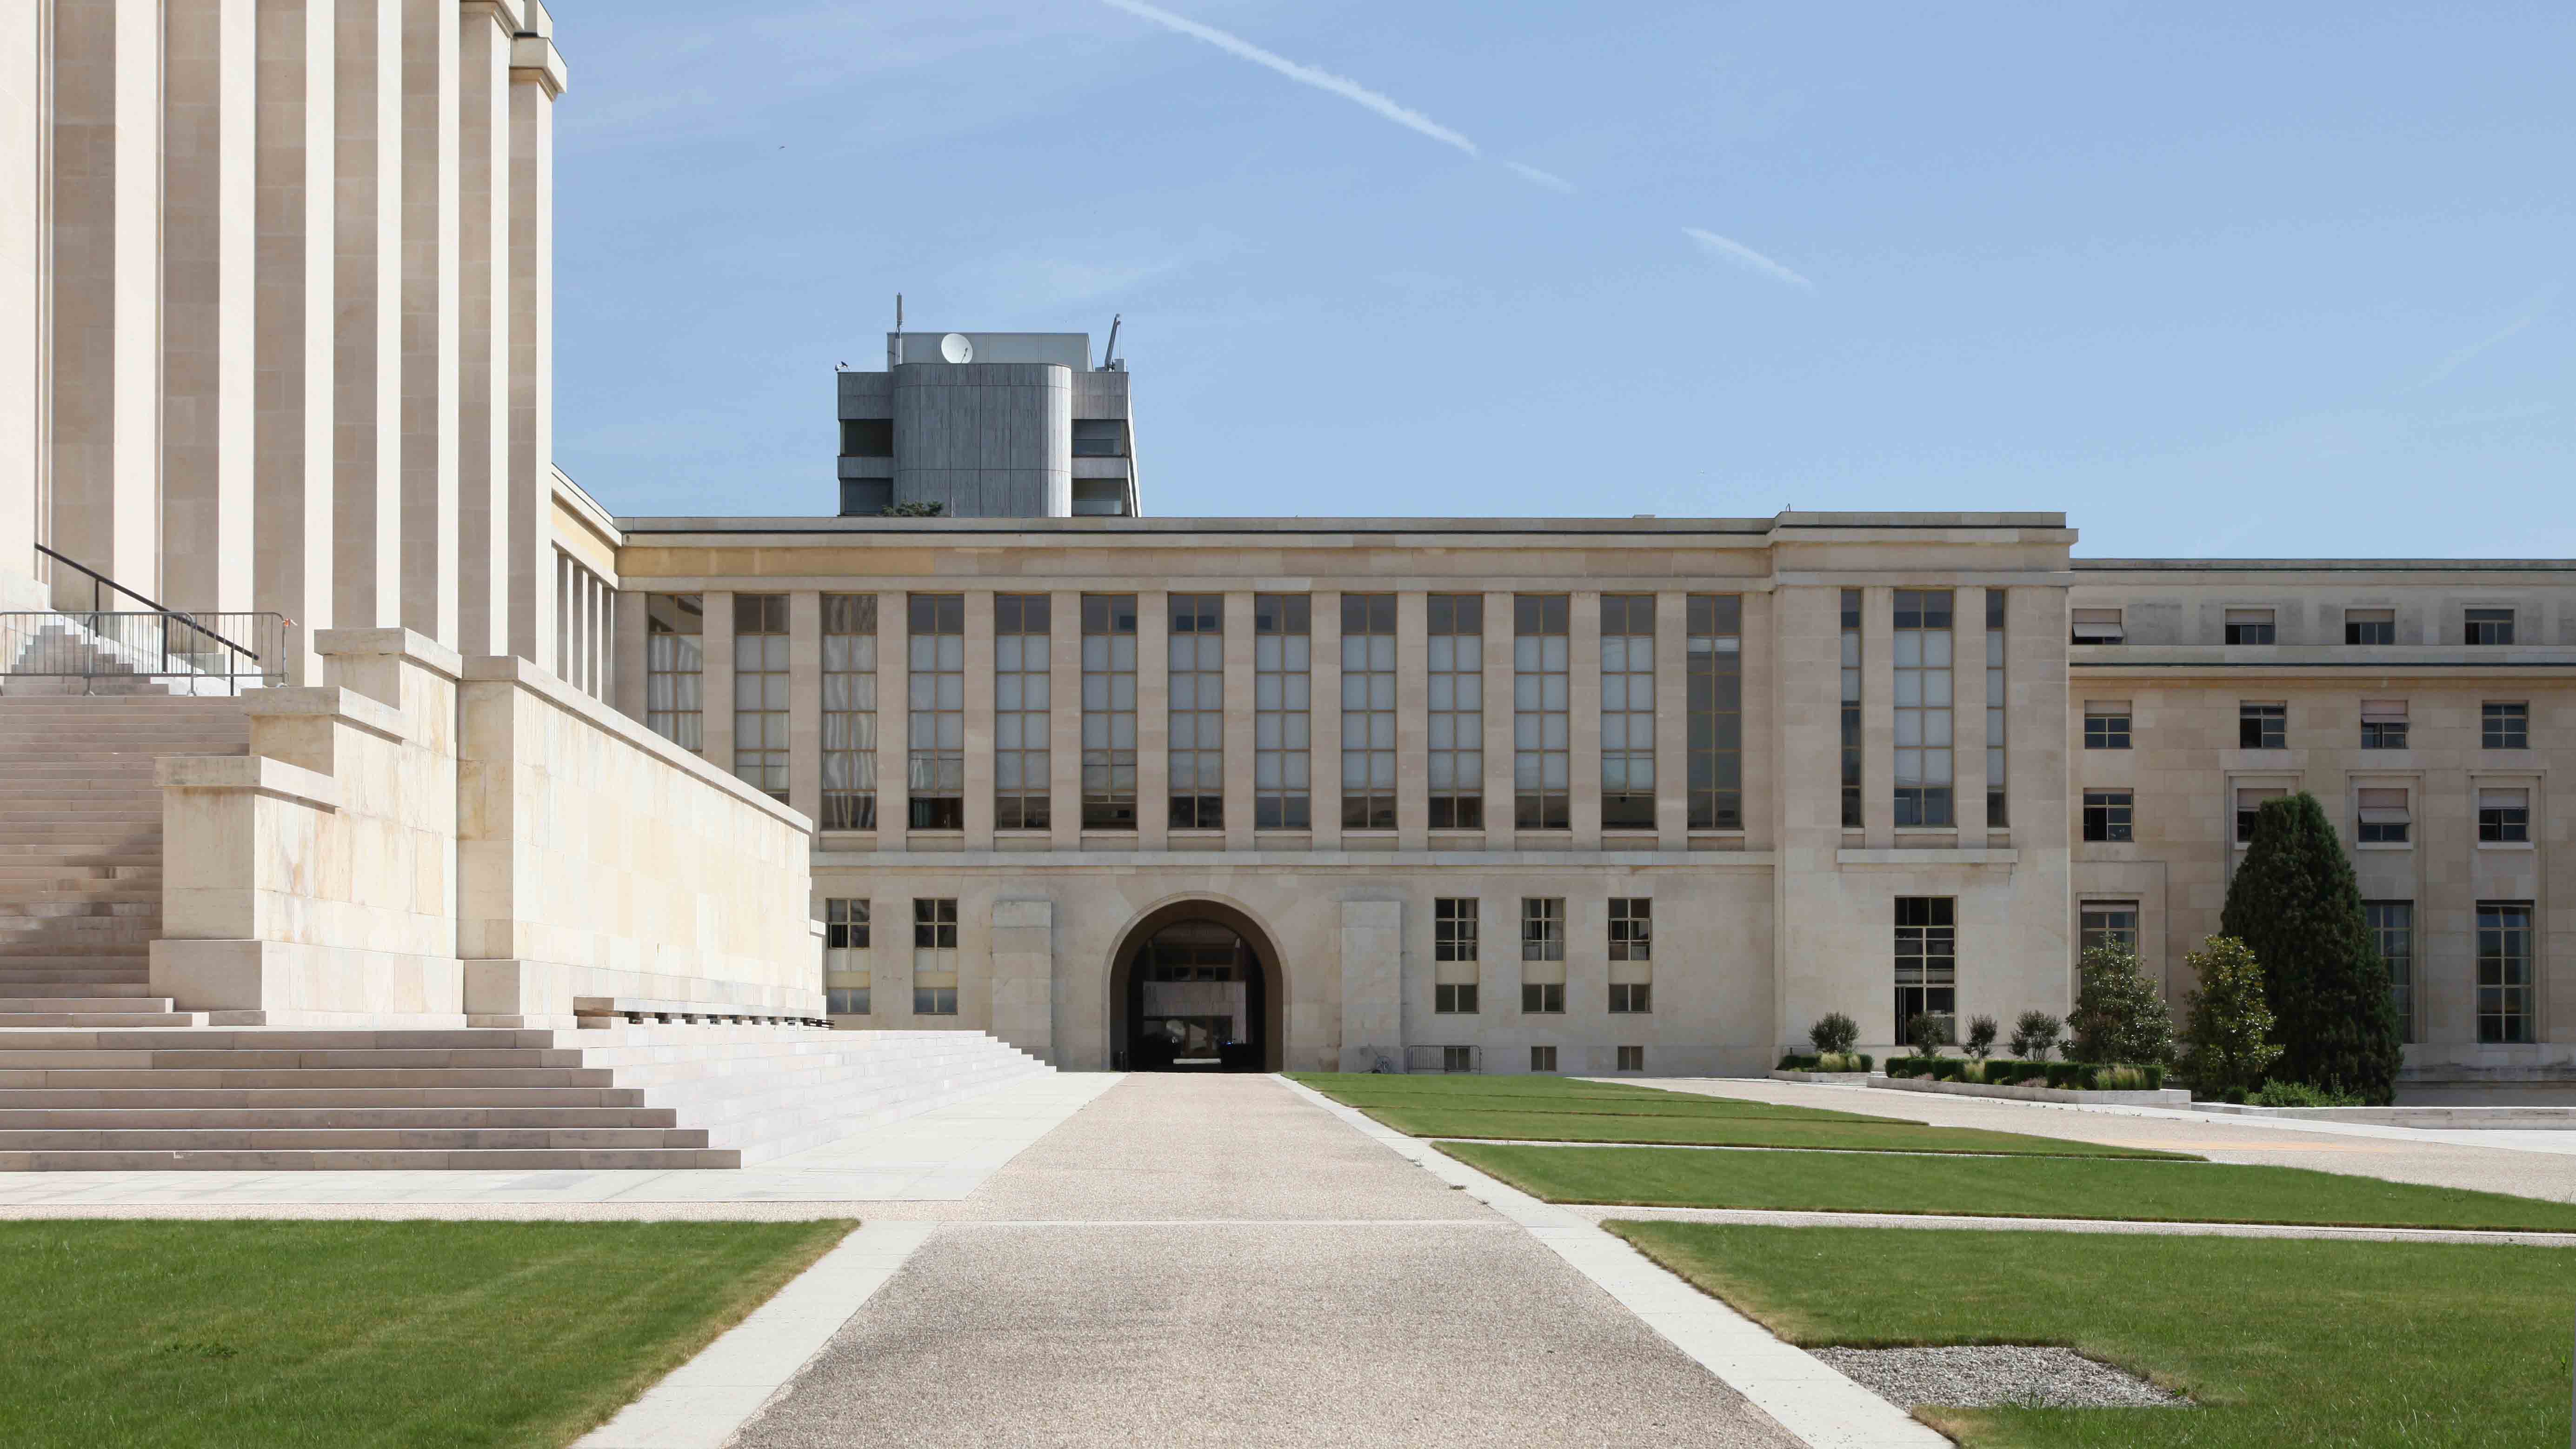 Palais des nations main building with steel windows